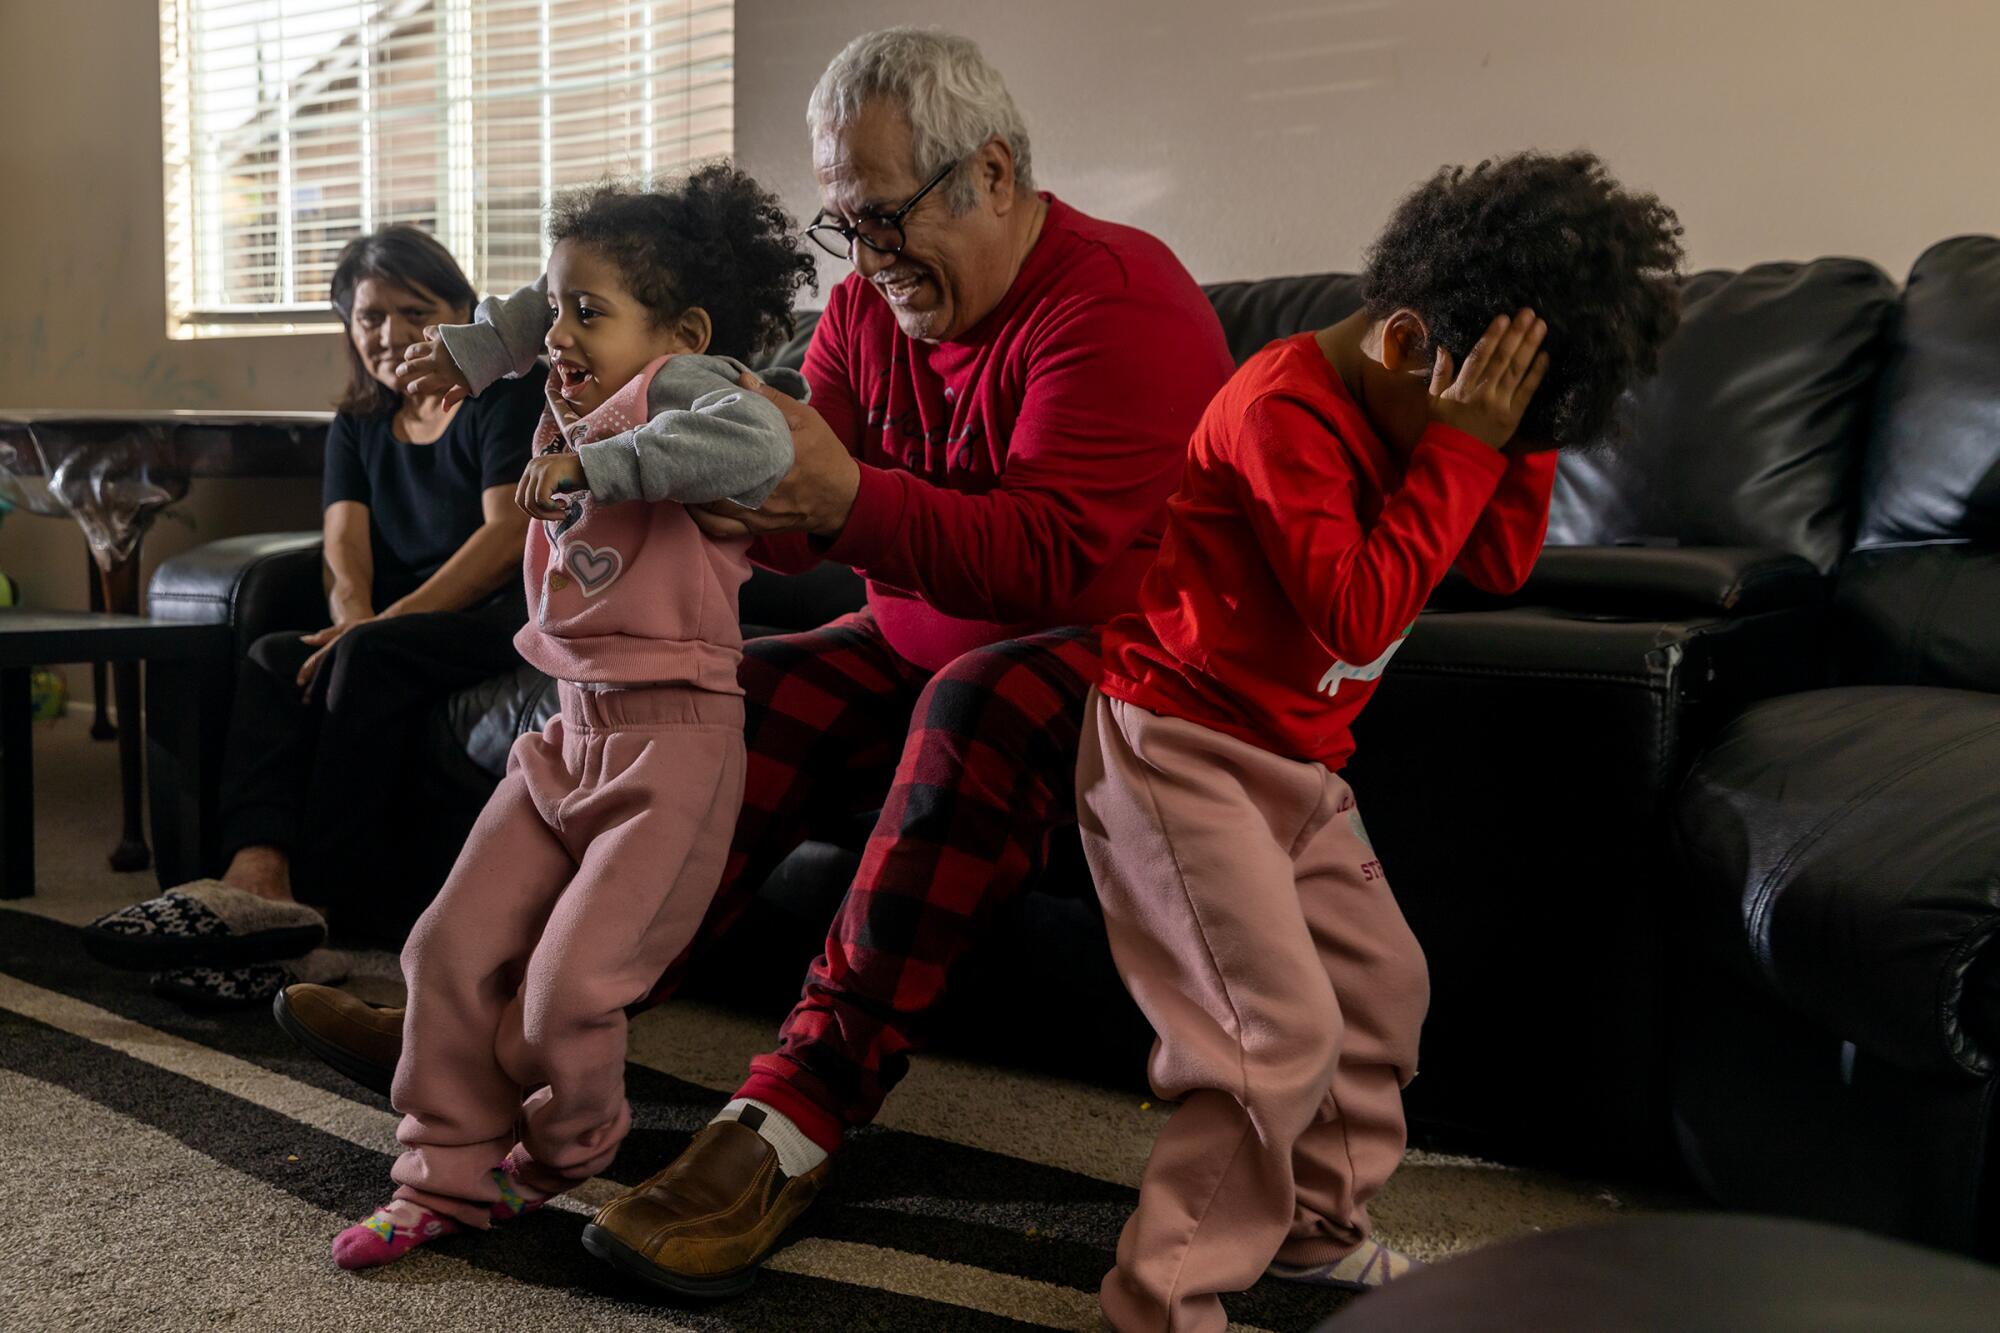 A grandfather plays with his granddaughters